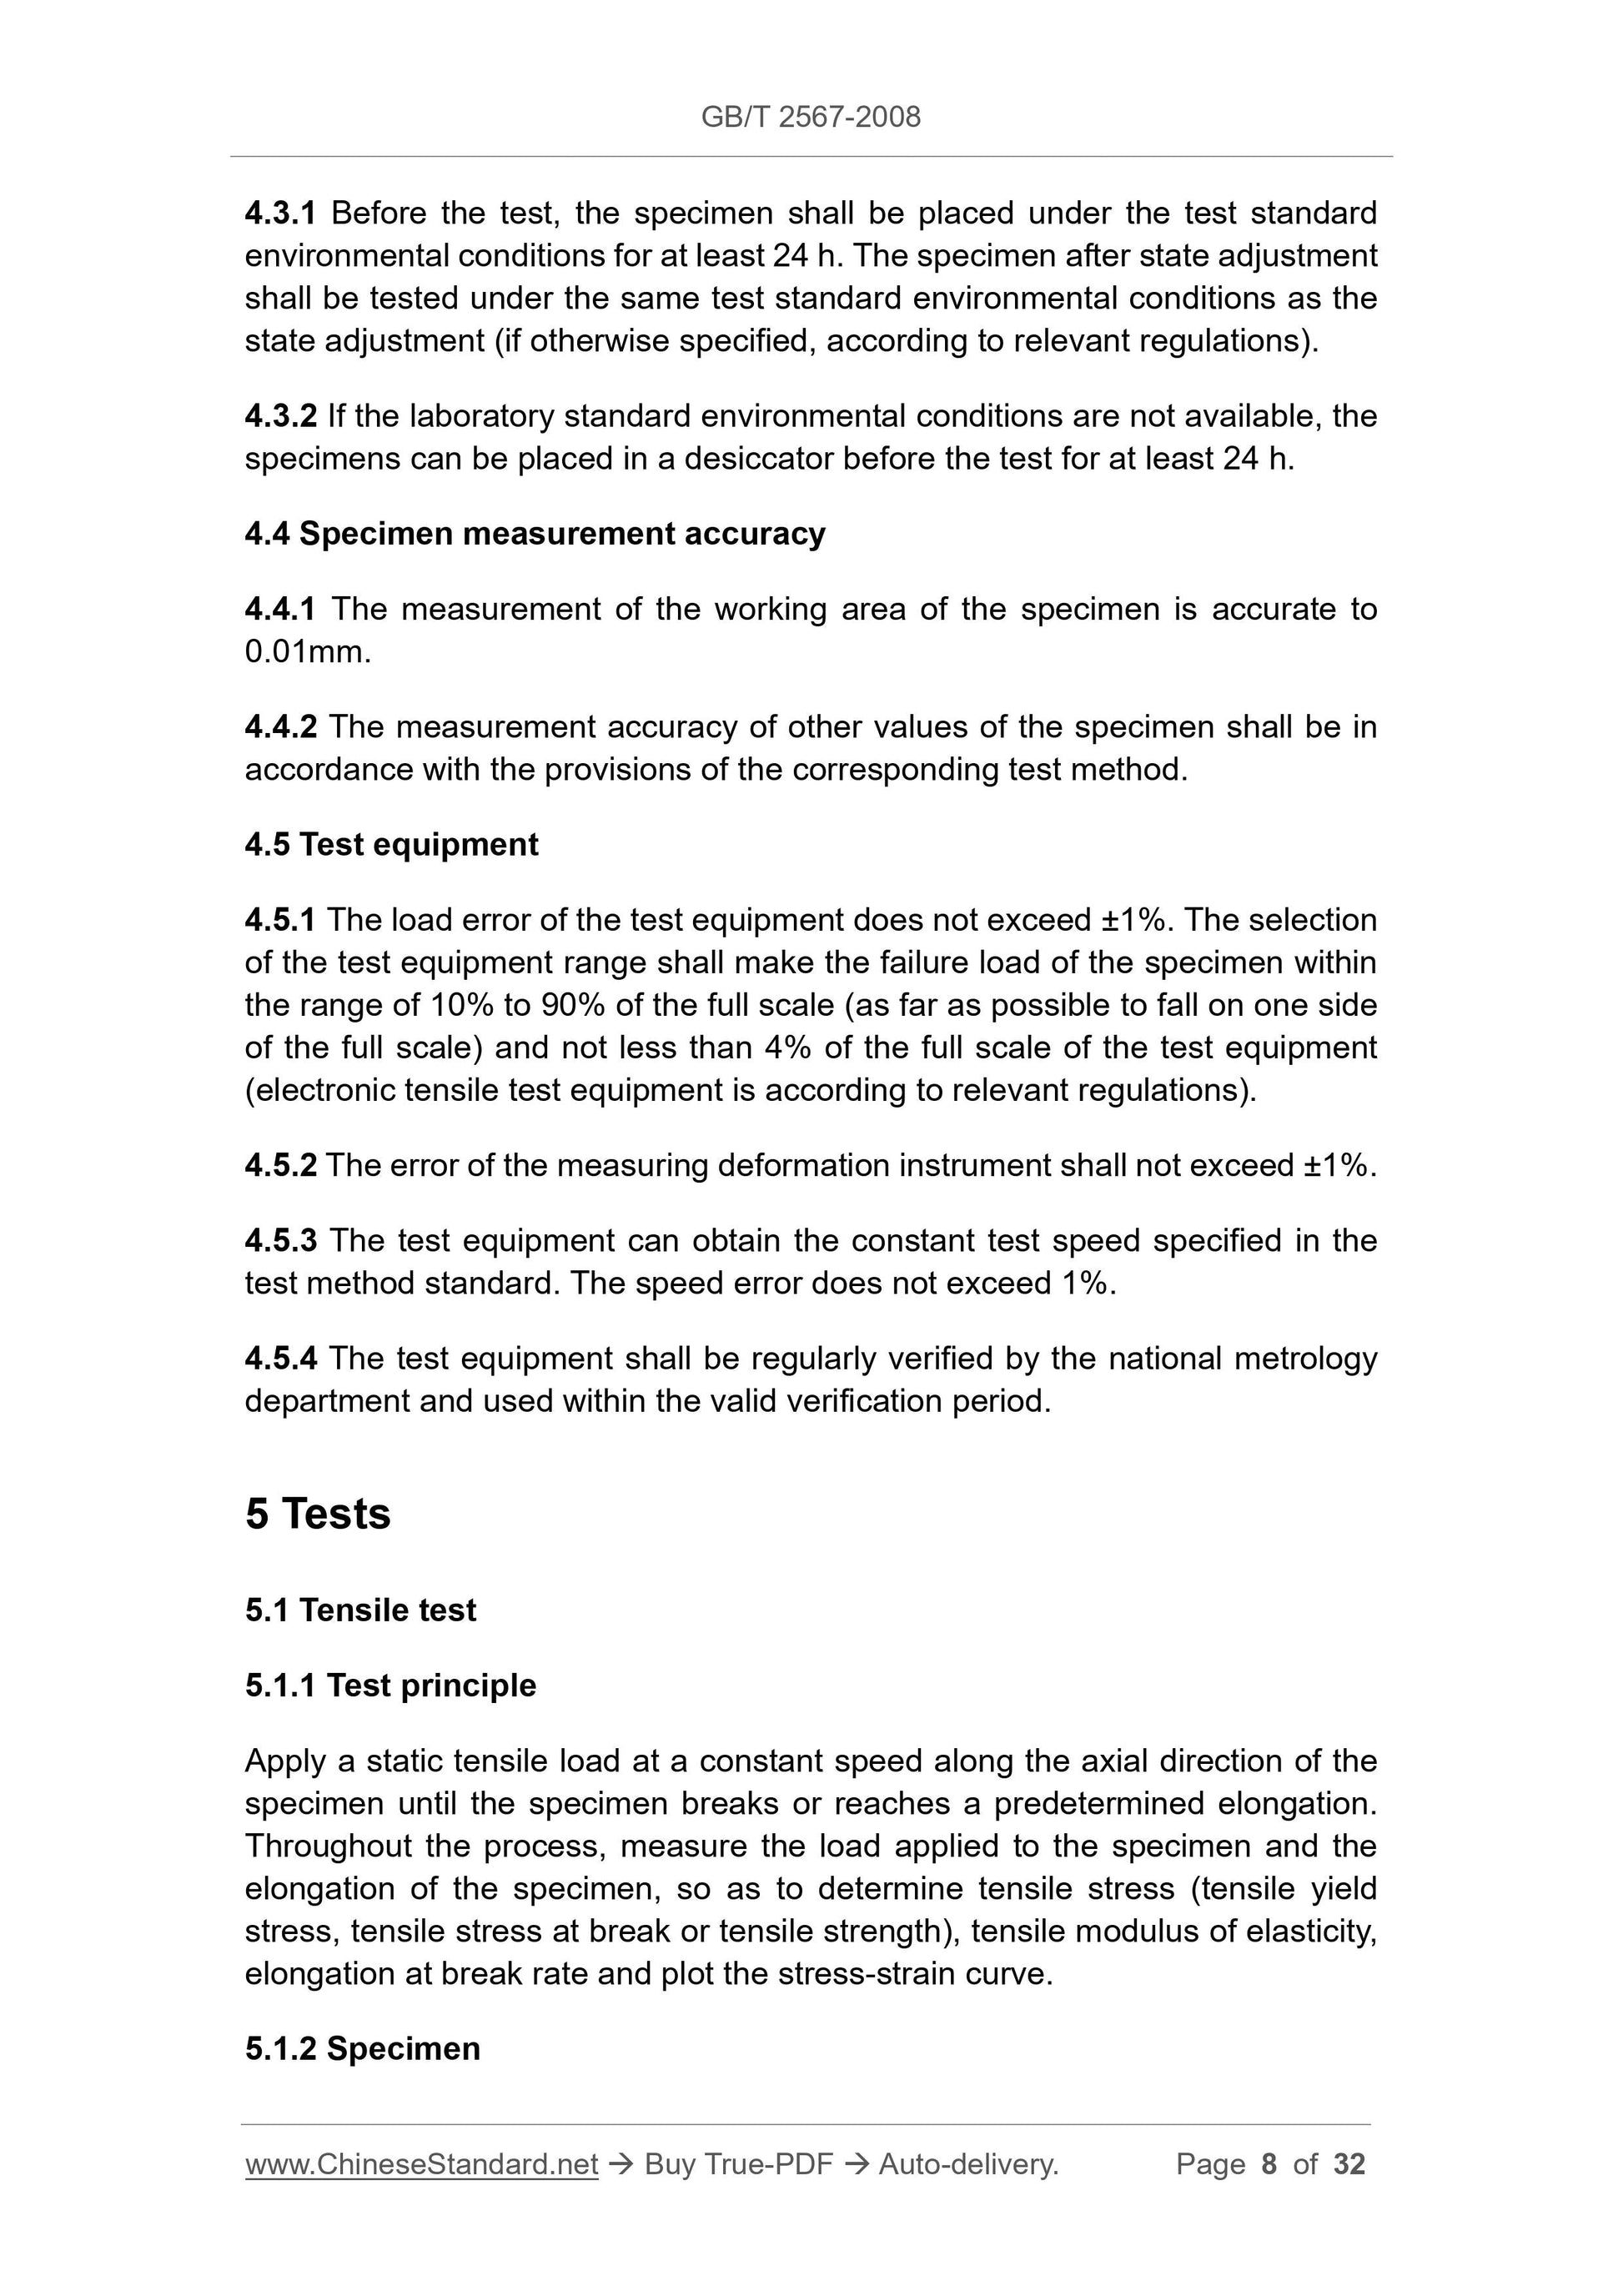 GB/T 2567-2008 Page 5